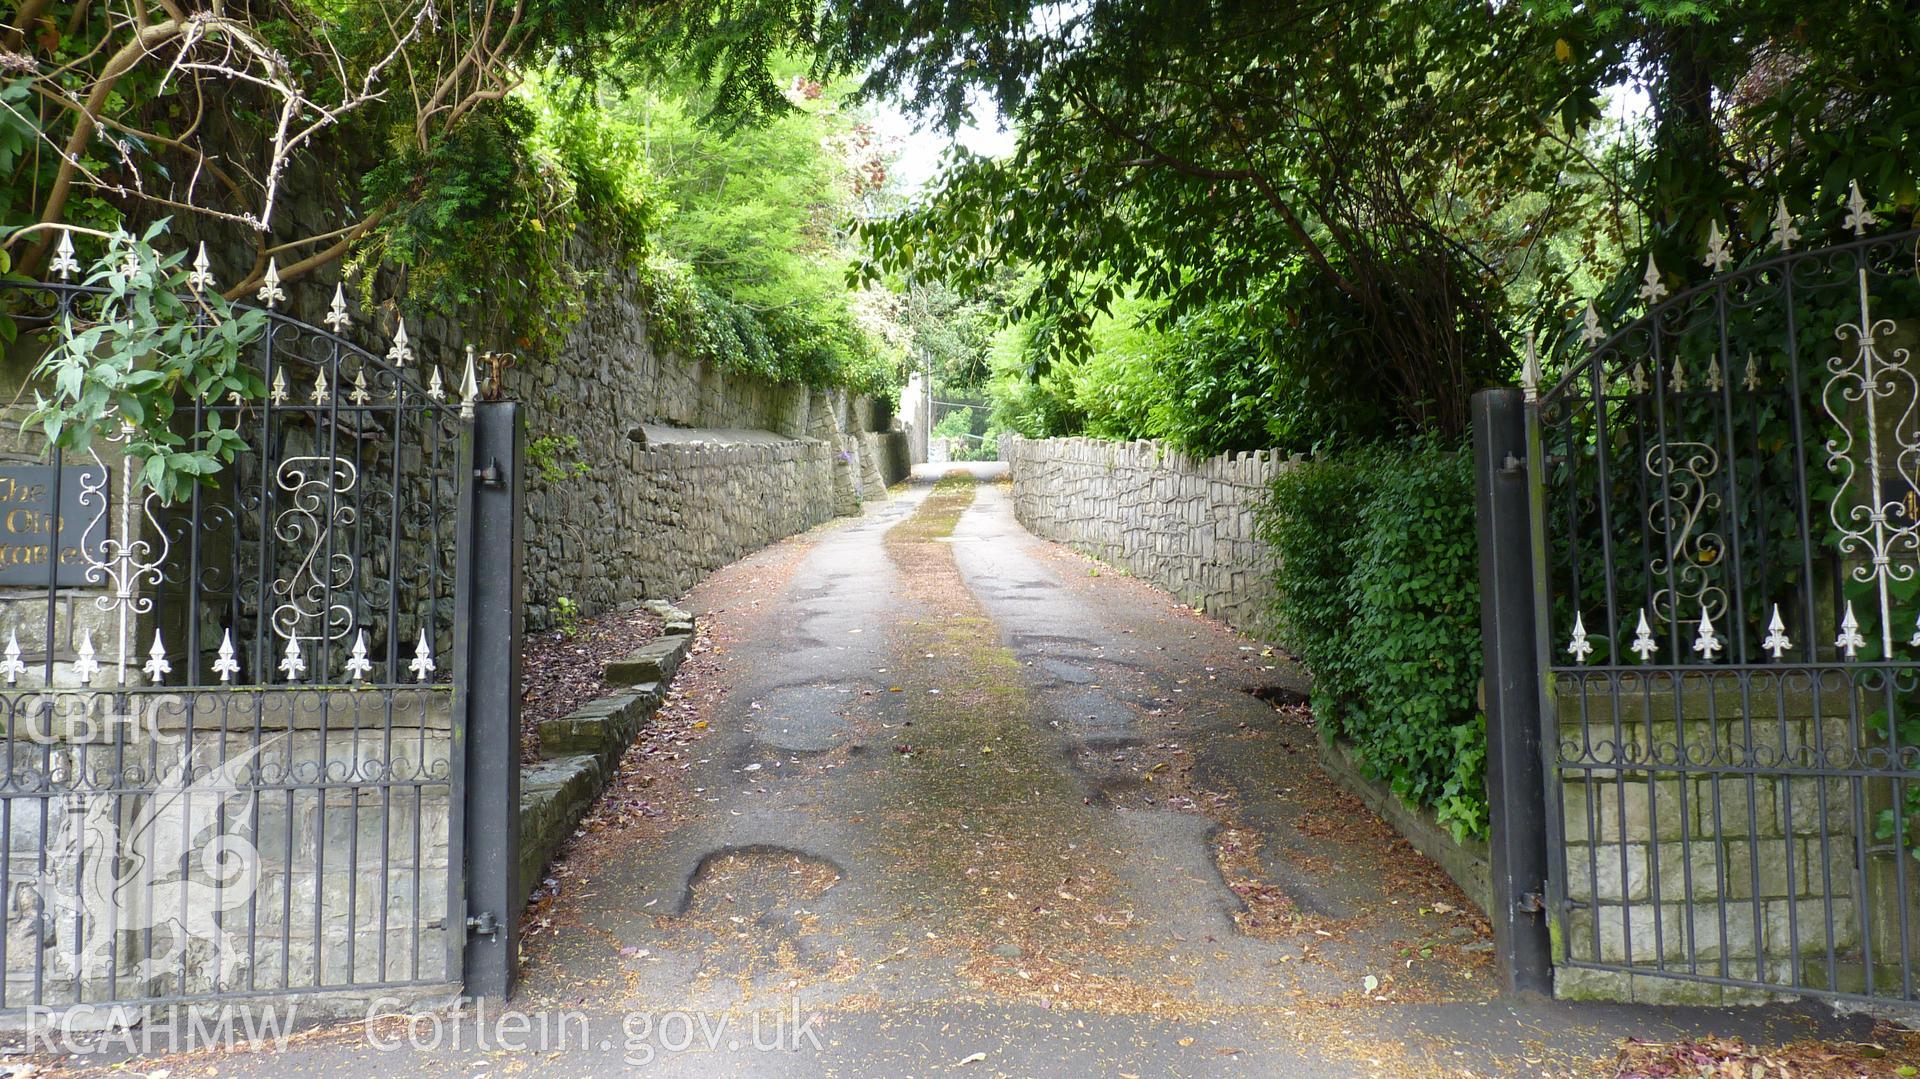 'Entrance to the coach house driveway from Park Street, now used as a drive to neighbouring private residence.' Photographed as part of archaeological work at Coed Parc, Newcastle, Bridgend, carried out by Archaeology Wales, 2016. Project no. P2432.